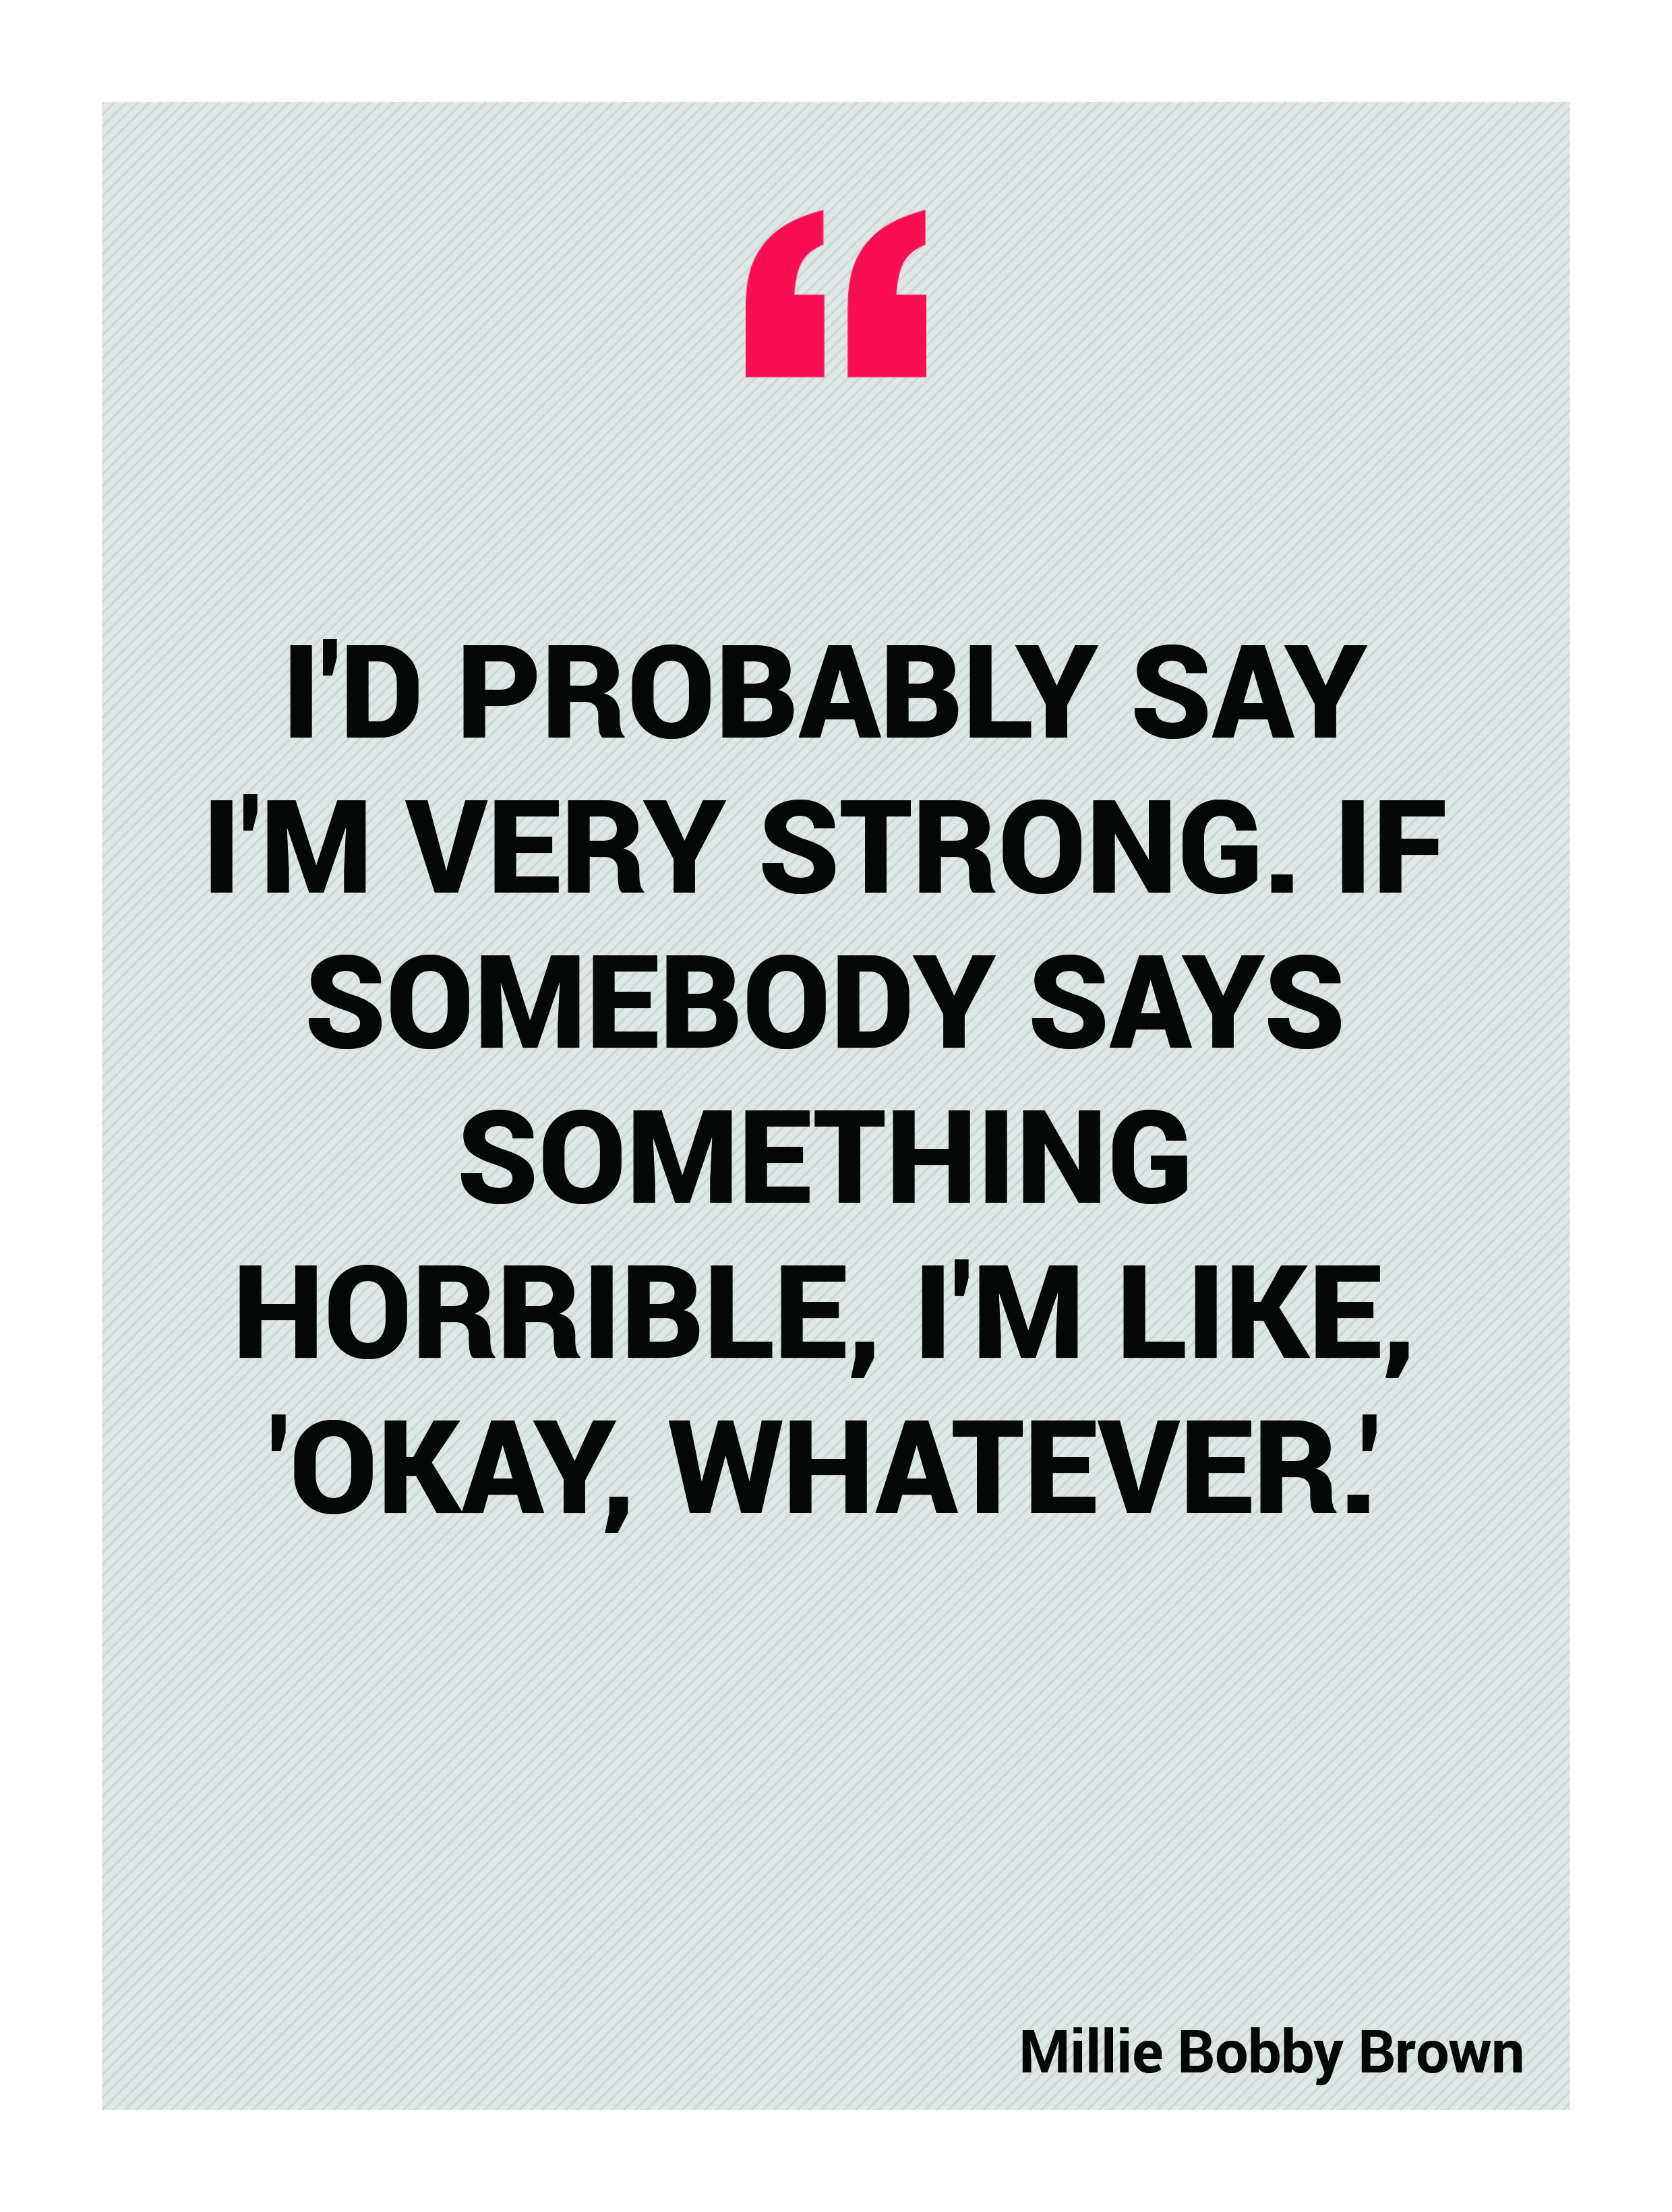 I'd probably say I'm very strong. If somebody says something horrible, I'm like, 'Okay, whatever.' Millie Bobby Brown